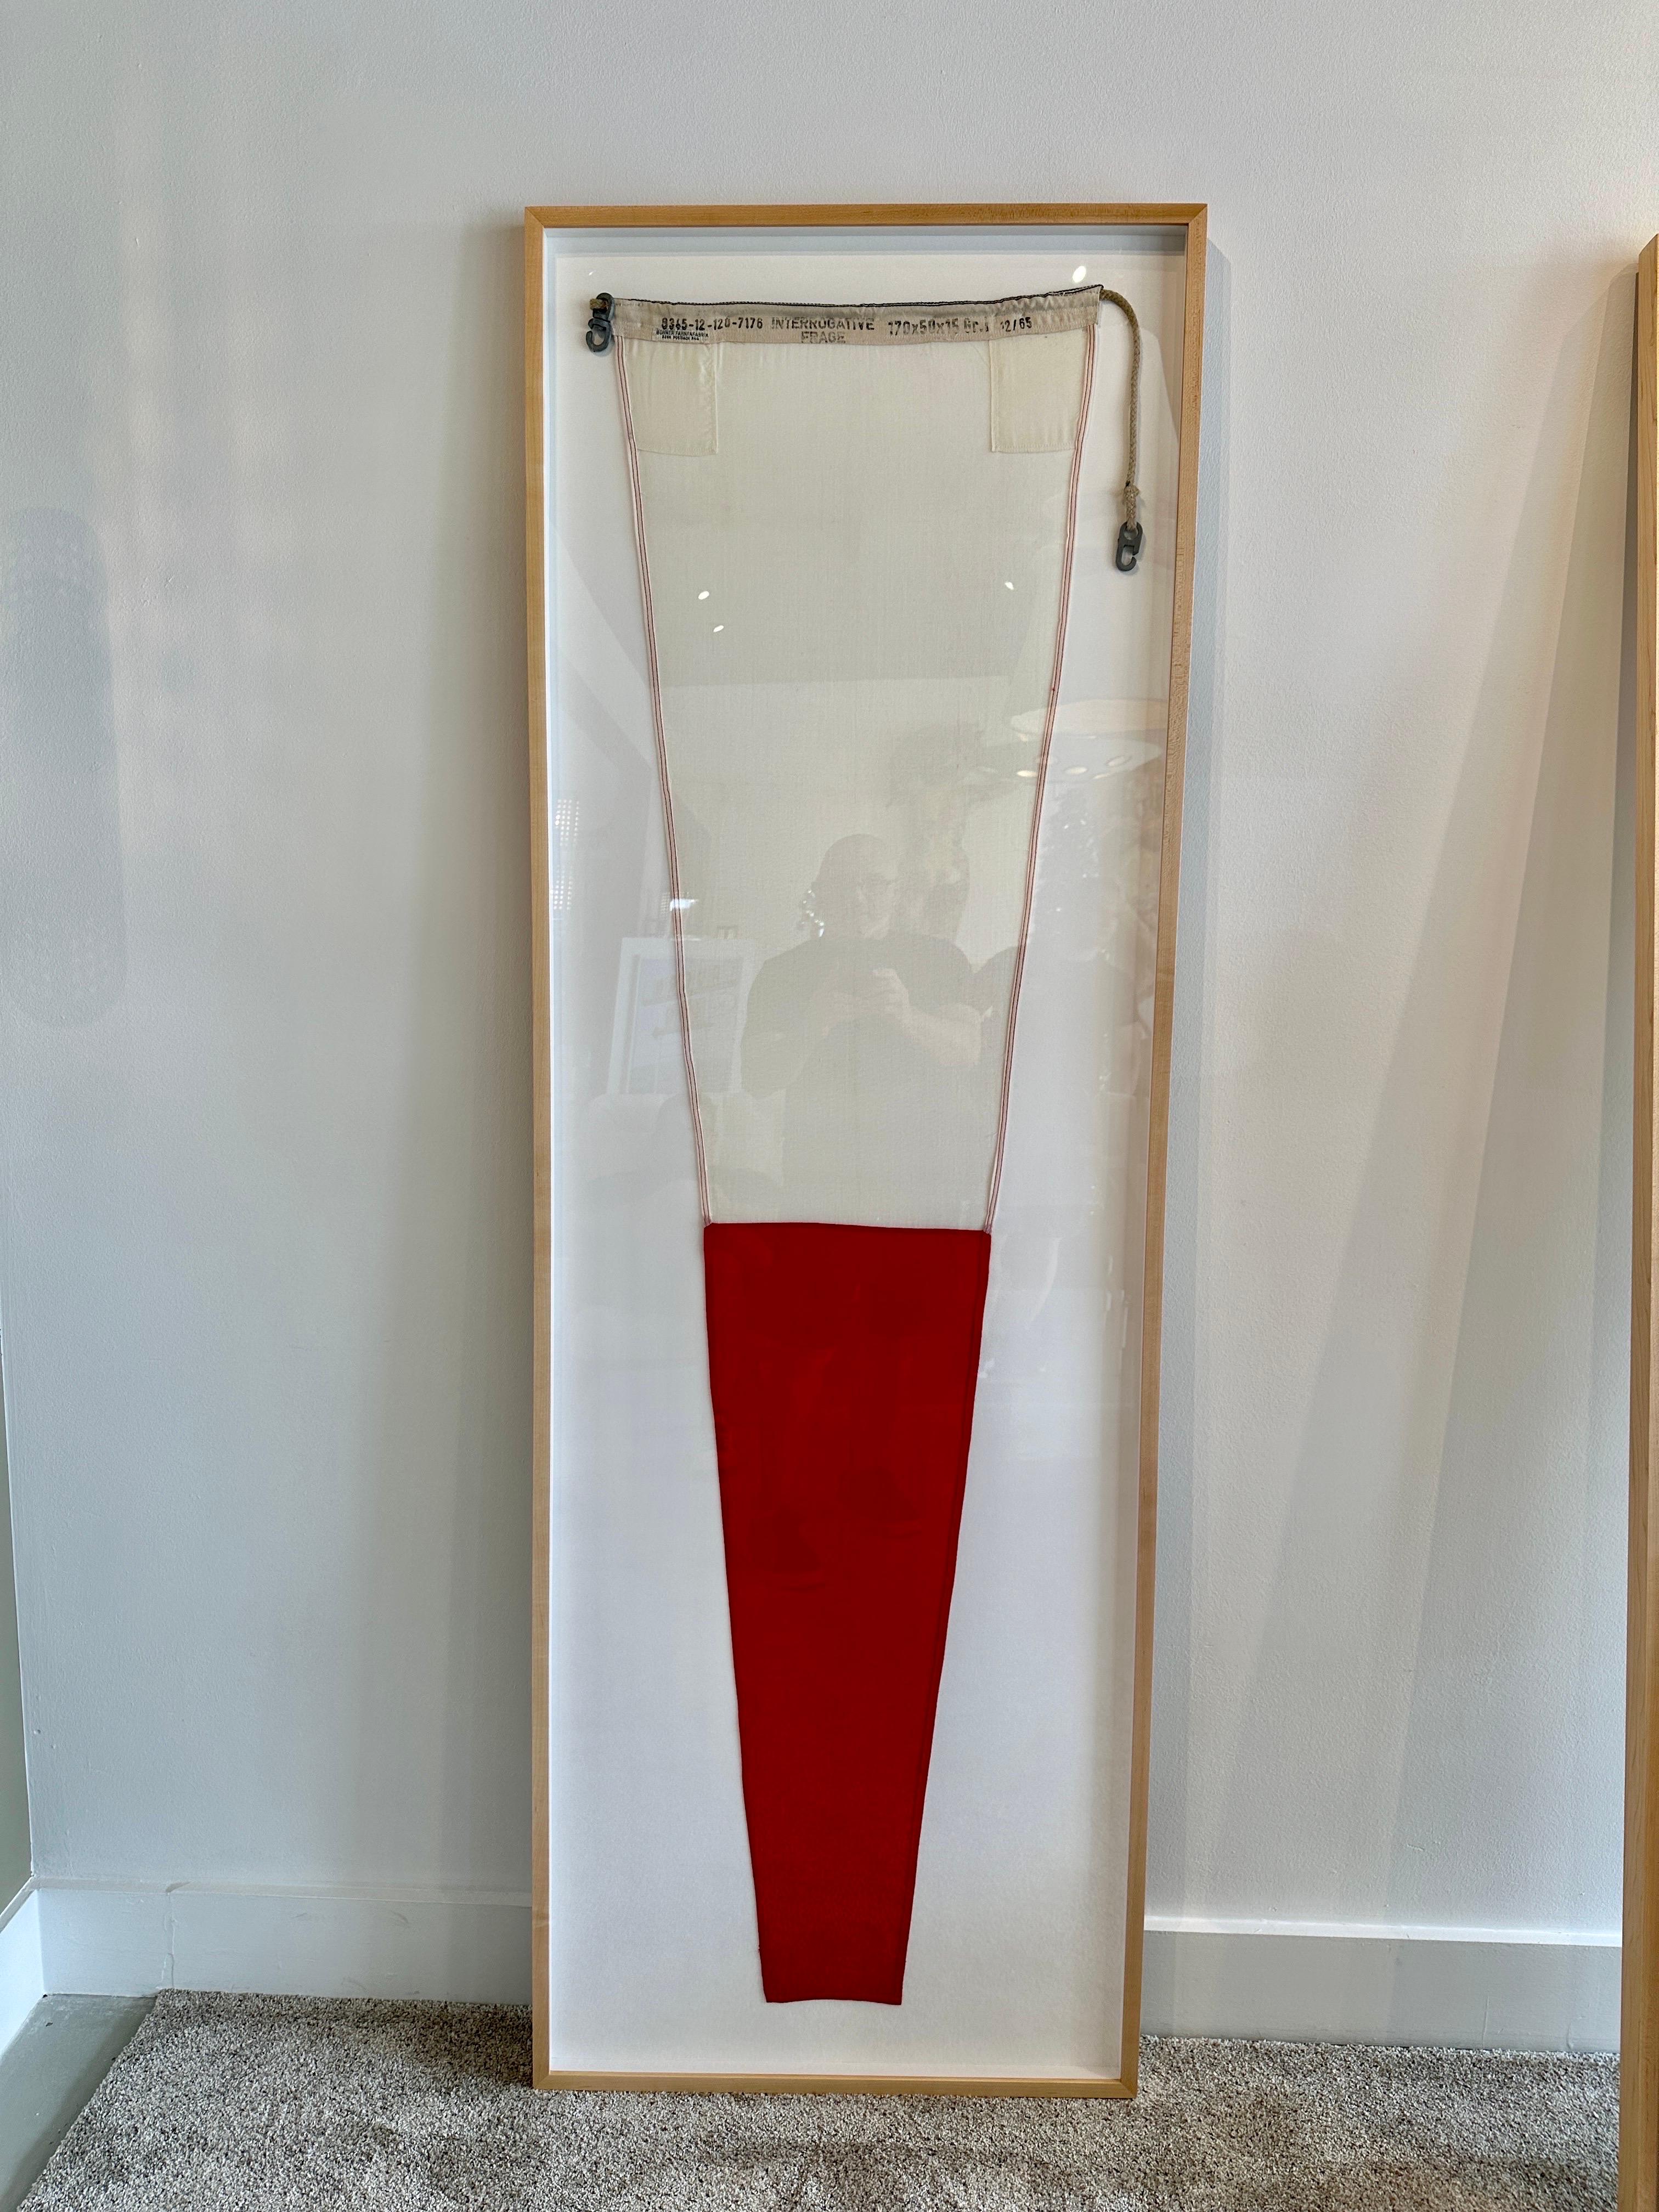 Authentic Nautical Signal Flag from 1940's Framed Professionally In Good Condition For Sale In East Hampton, NY